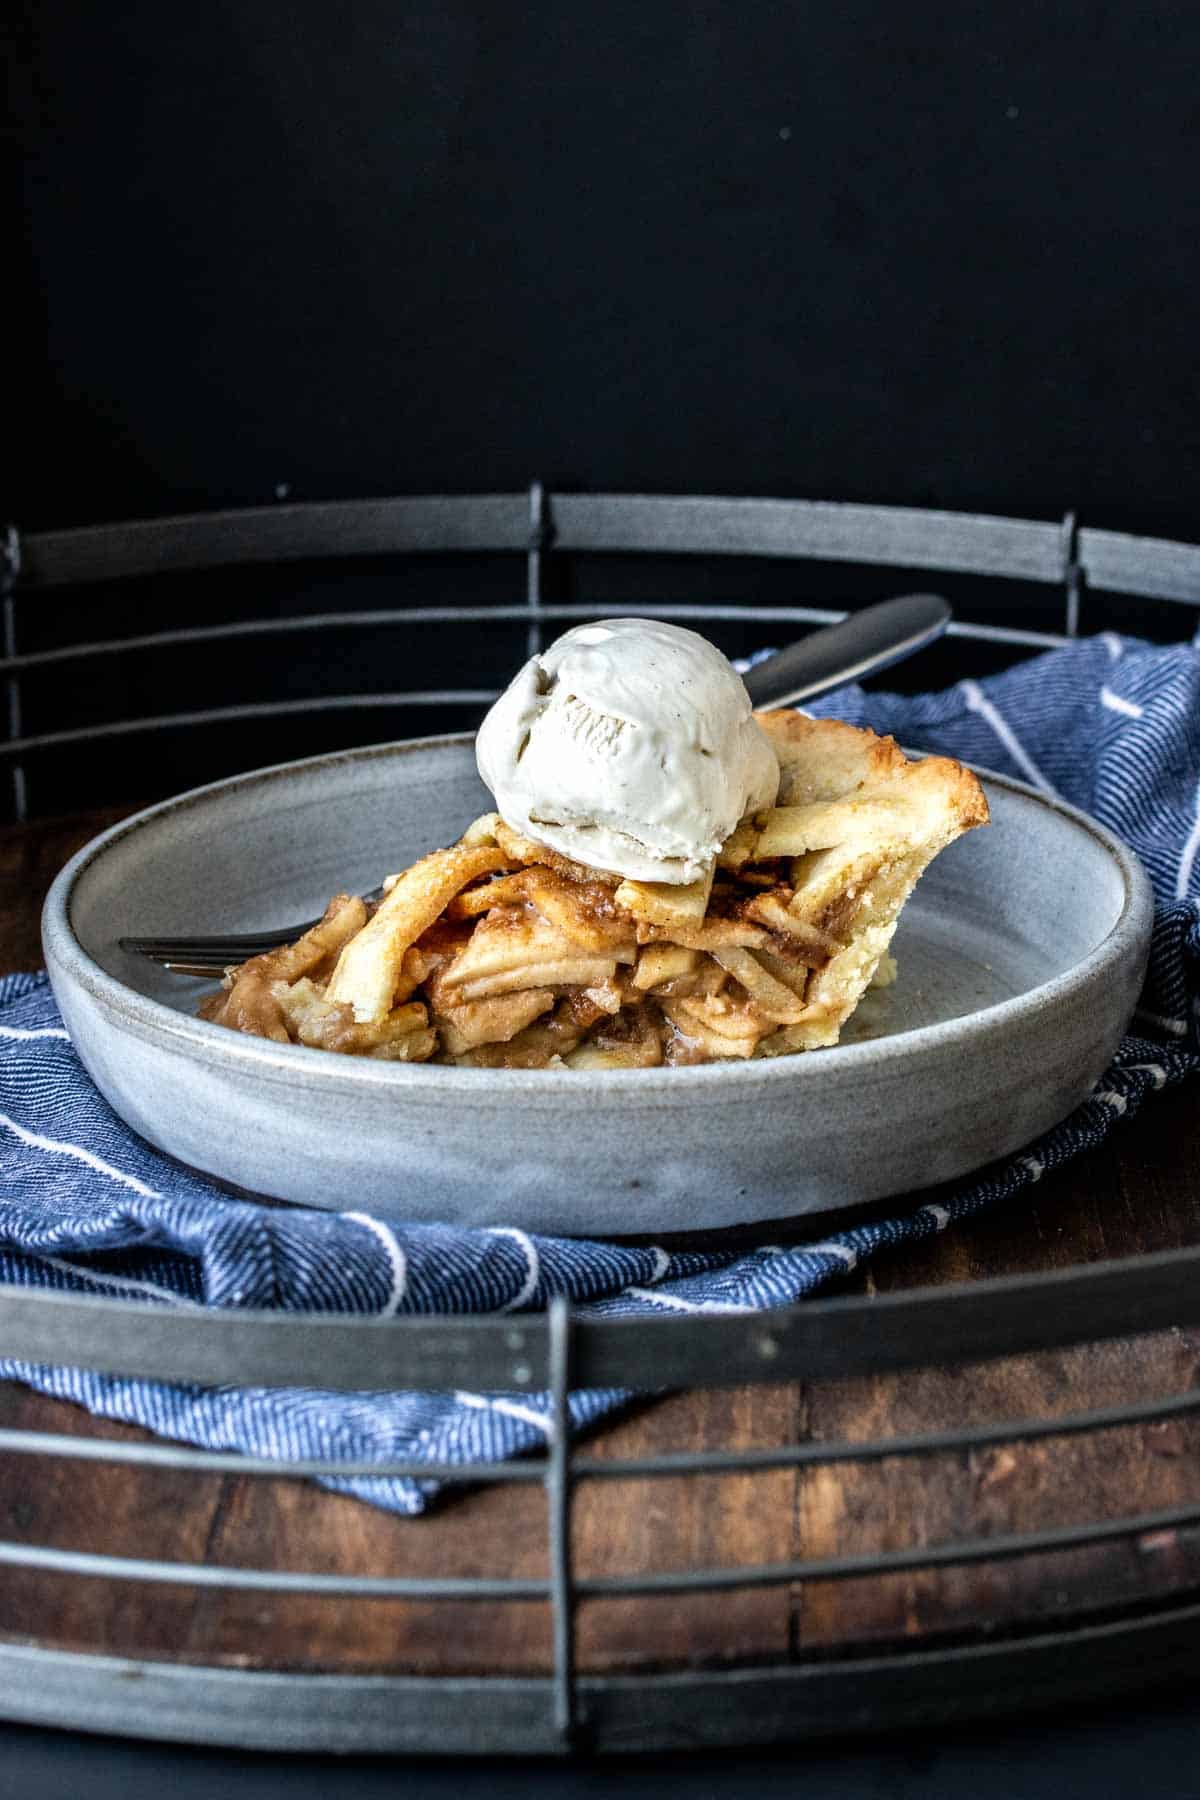 A piece of apple pie topped with ice cream on a grey plate.